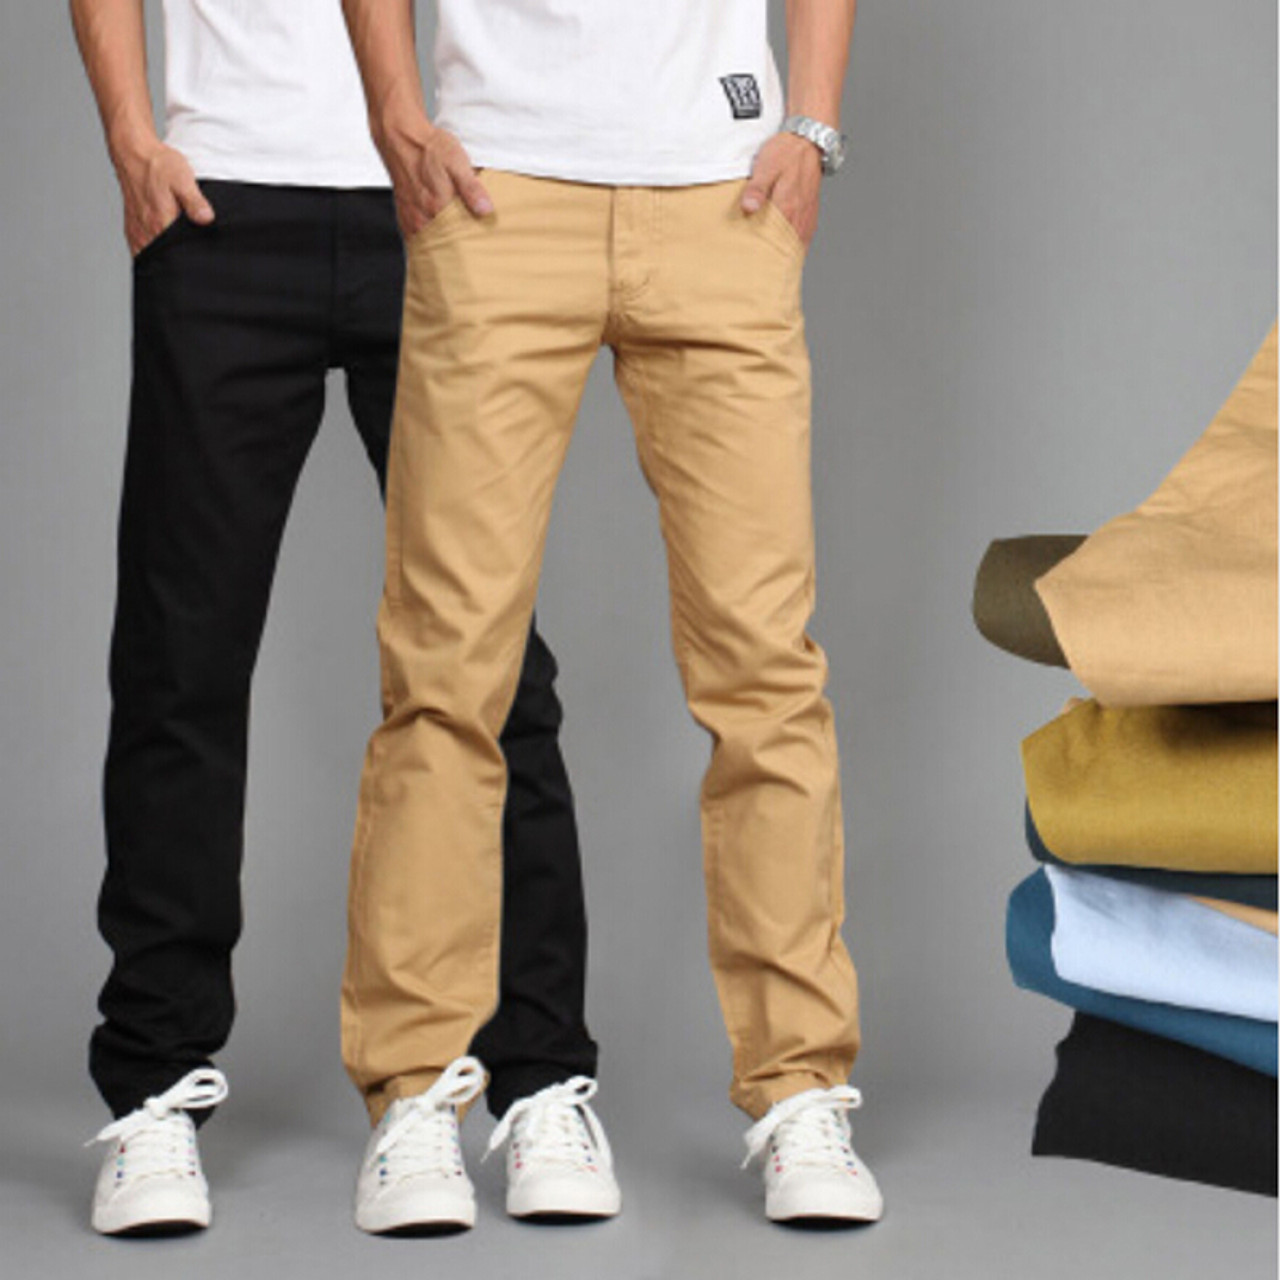 Mens Corduroy Cord Trousers Formal Pants Smart Casual Cotton Trousers | eBay